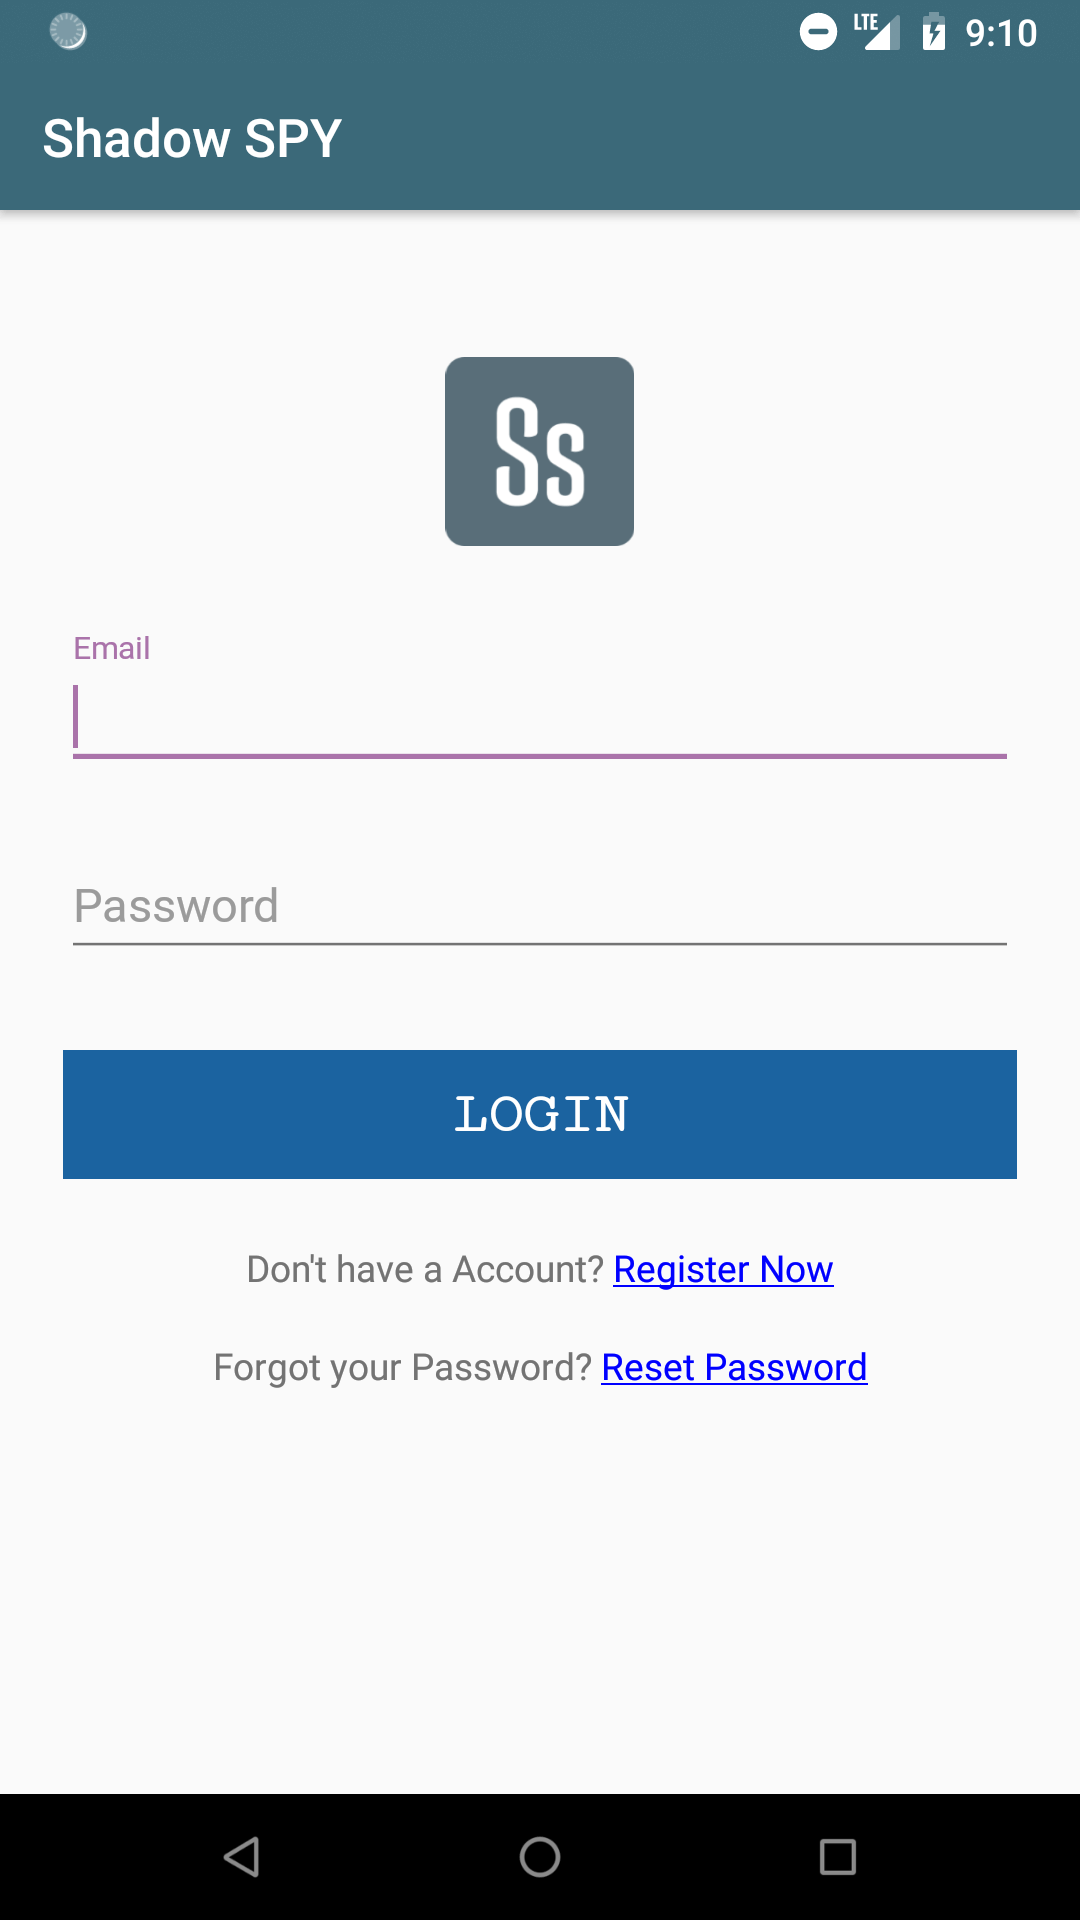 Login with Shadow SPY account to view Text Message logs